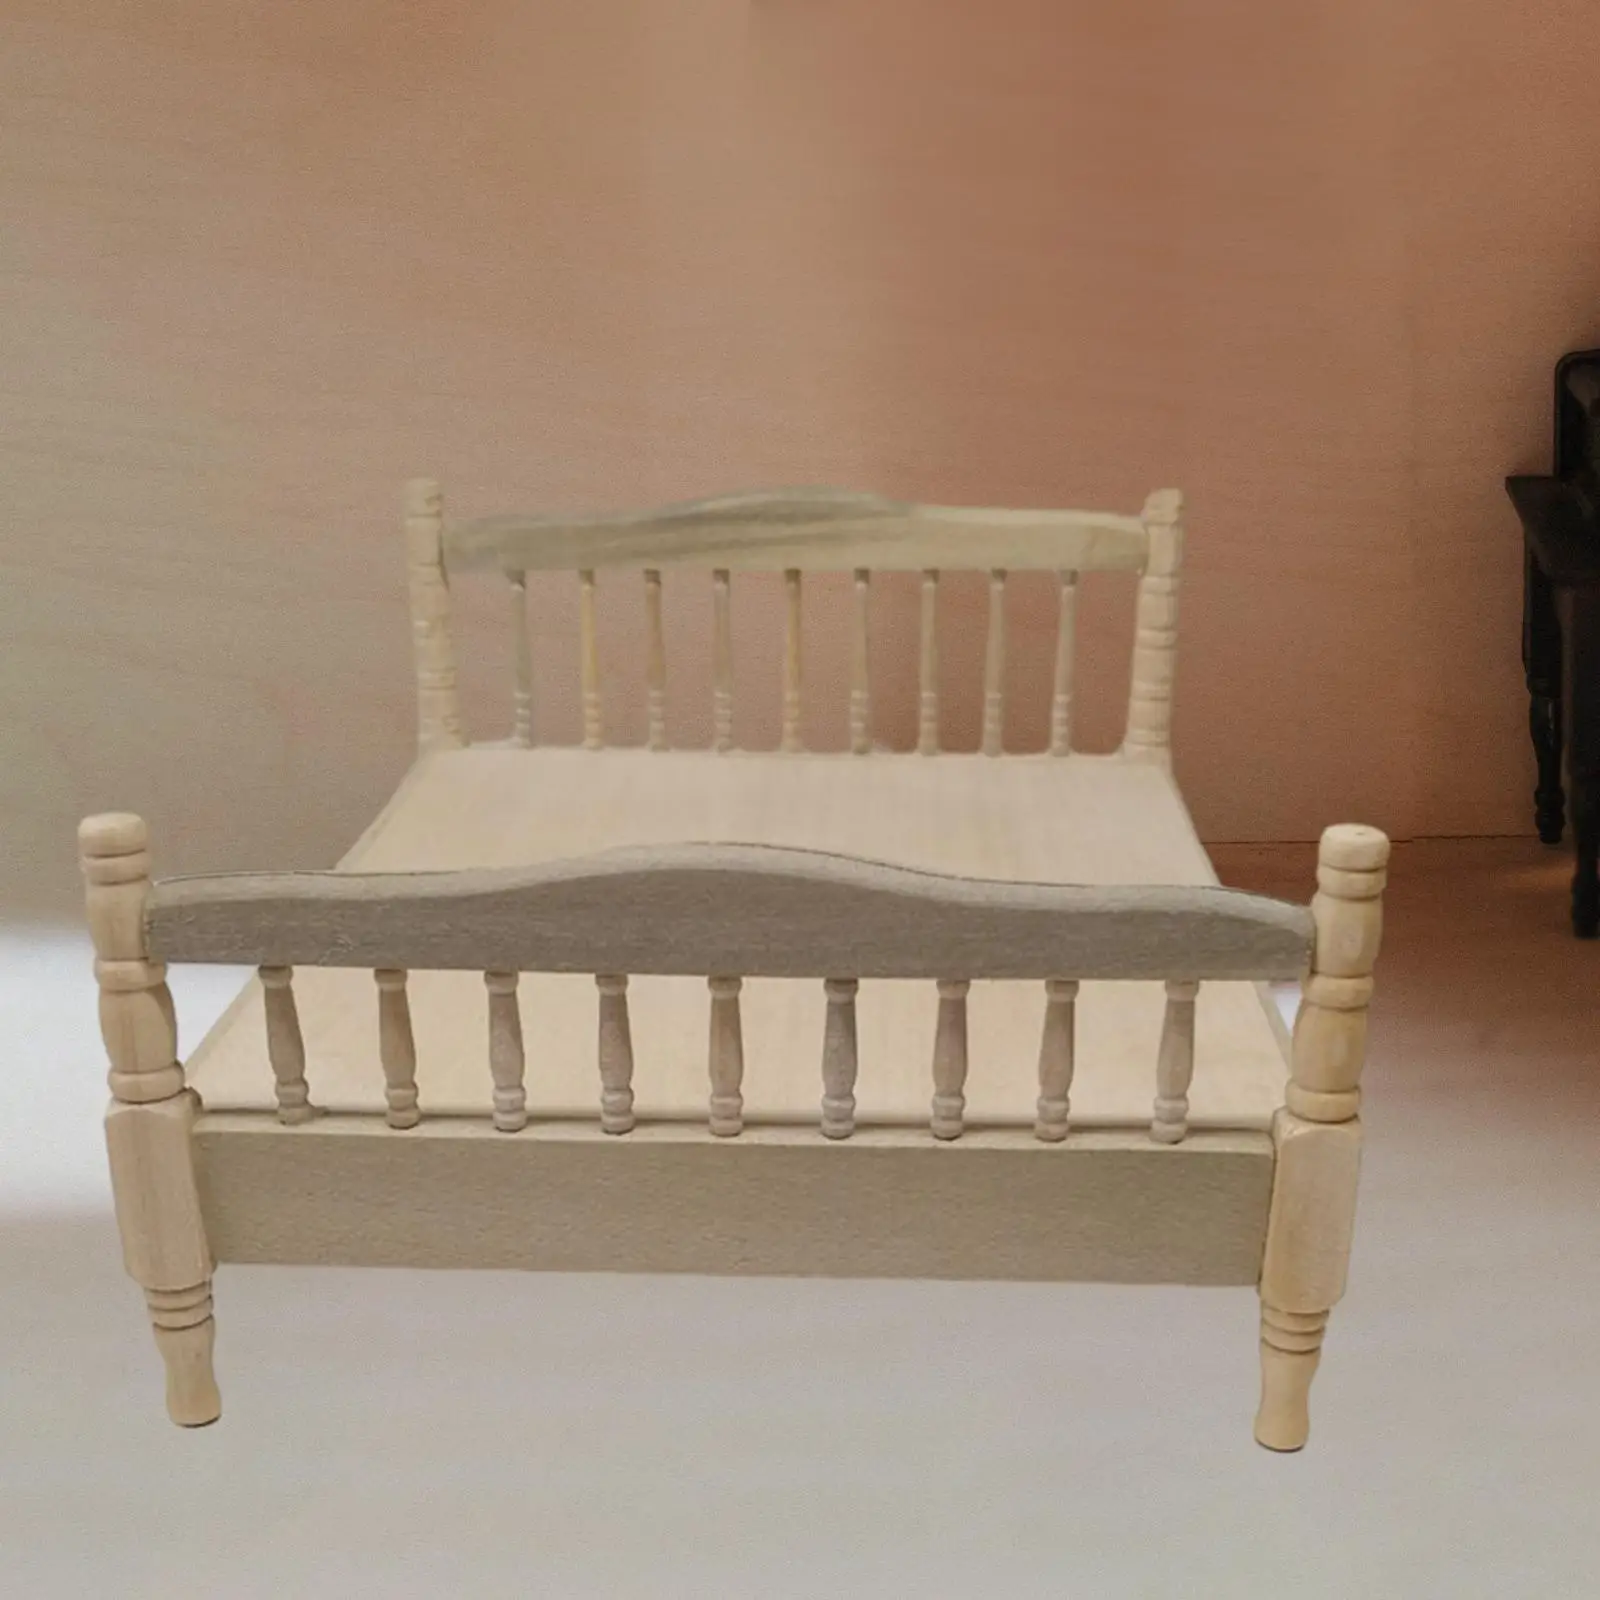 1/12 Dollhouse Bed Miniature Bedroom Furniture for DIY Scenery Architectural